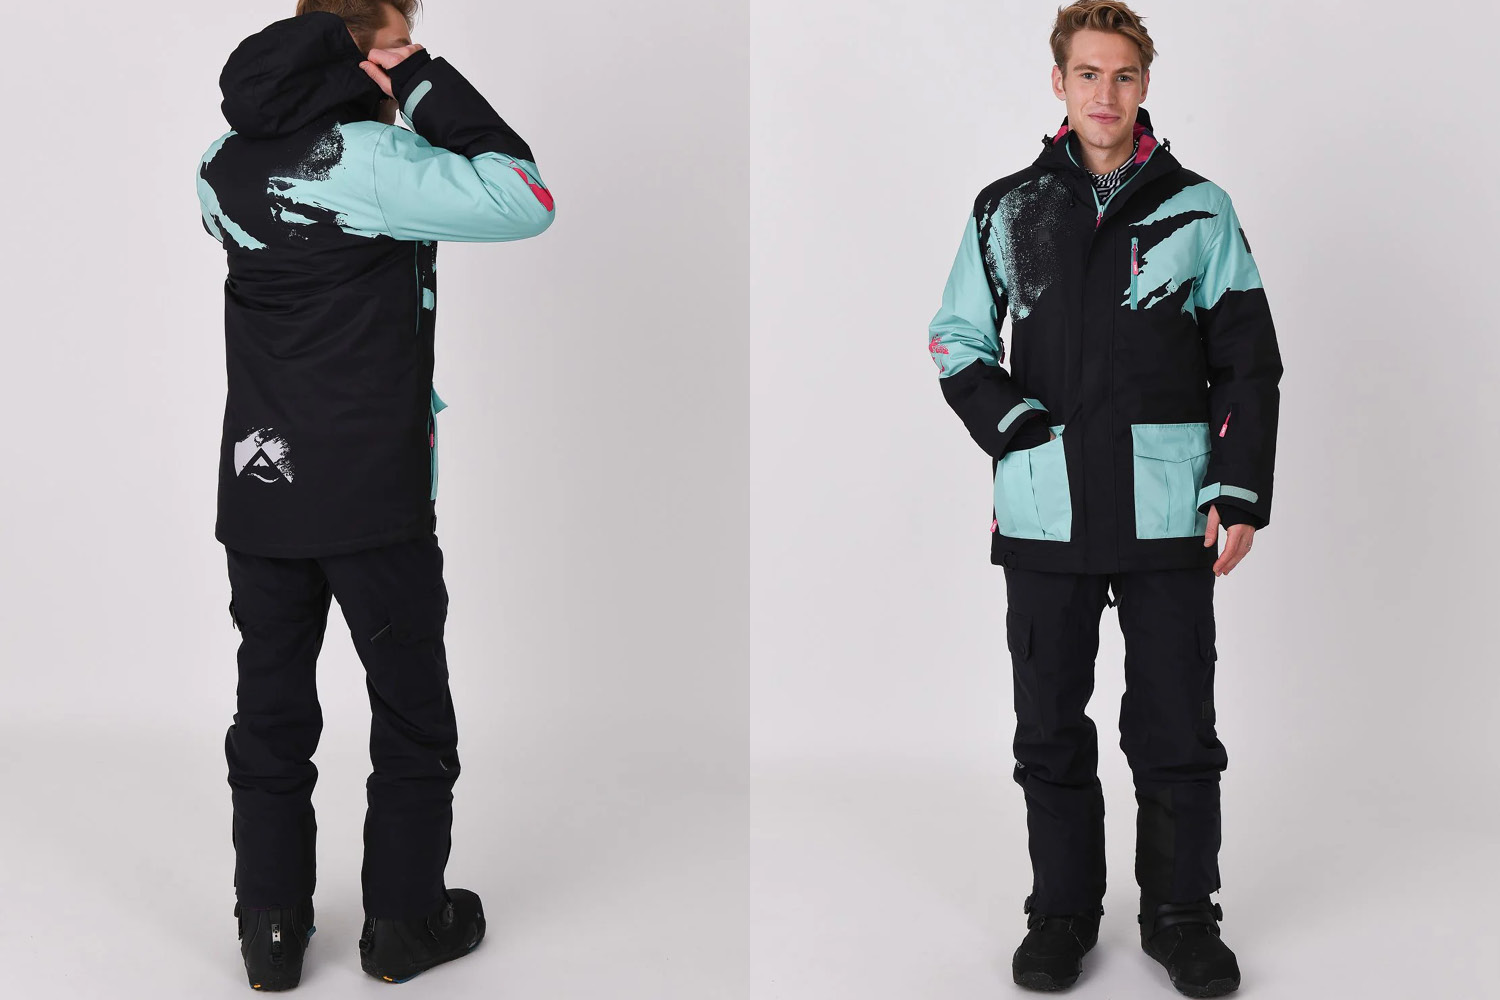 oosc-afterparty-ski-jacket-review